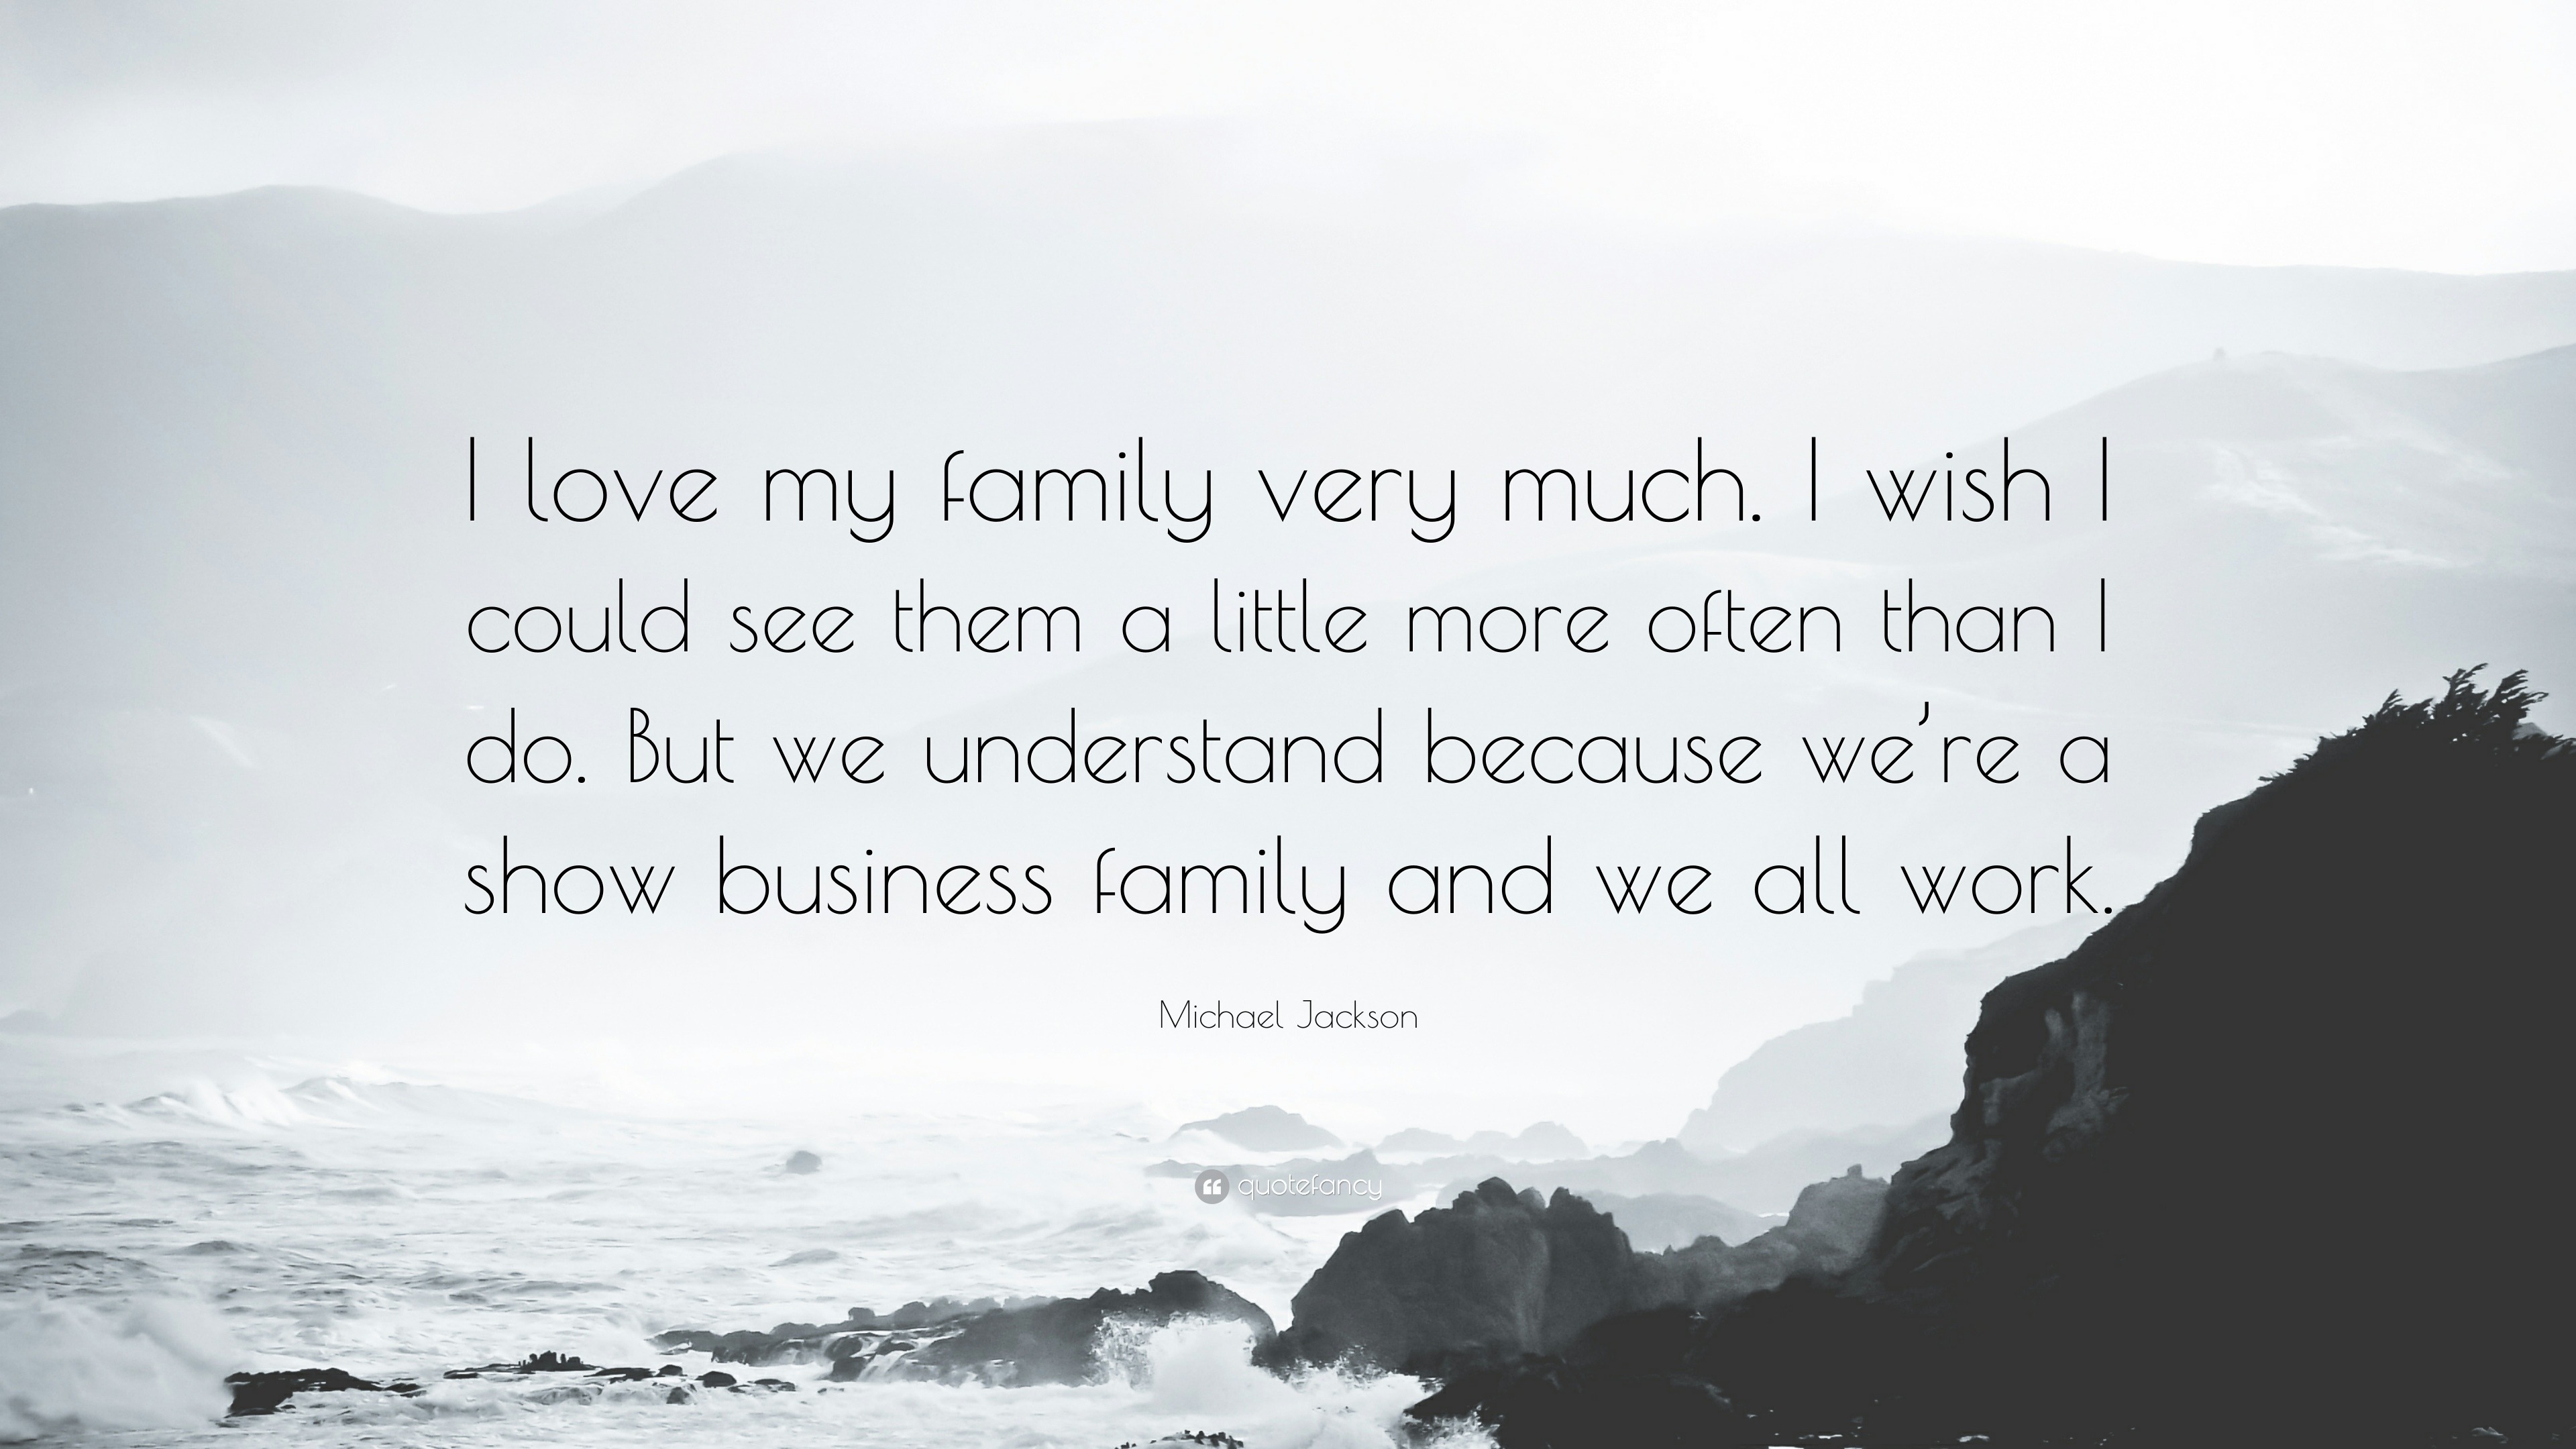 Michael Jackson Quote “I love my family very much I wish I could